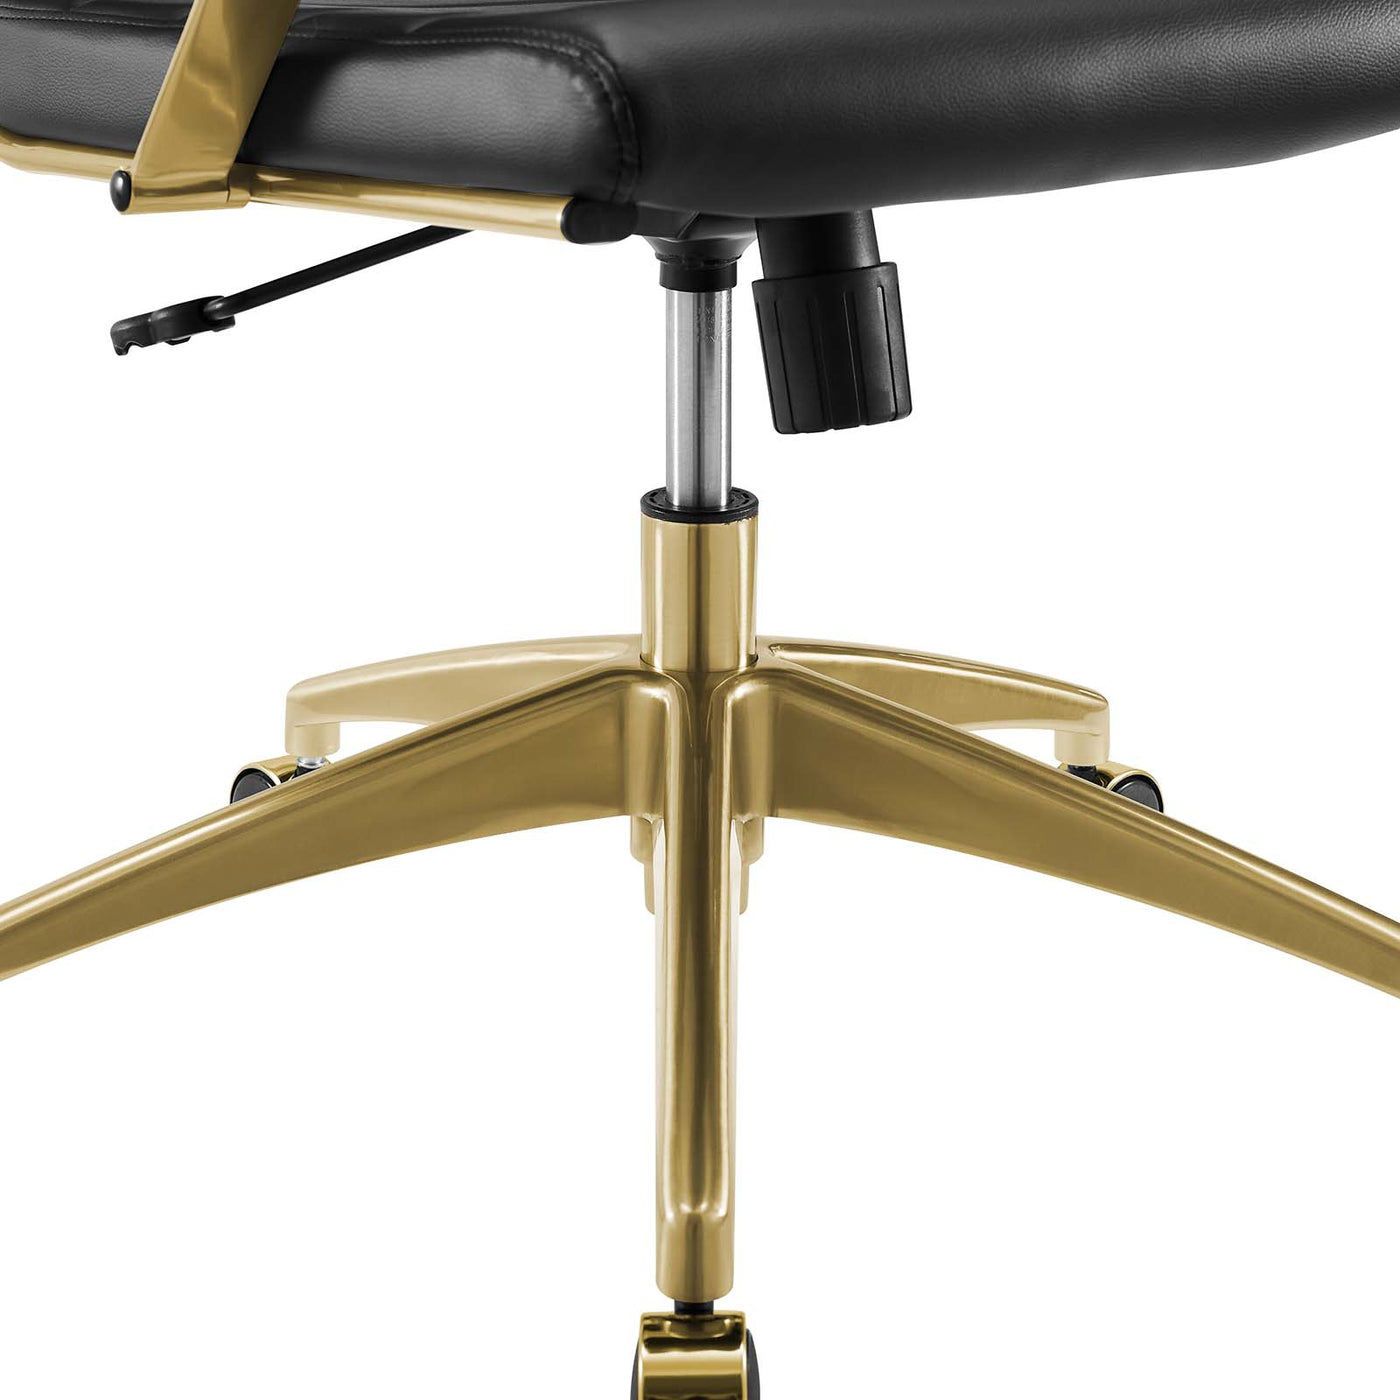 Jive Gold Stainless Steel Highback Office Chair